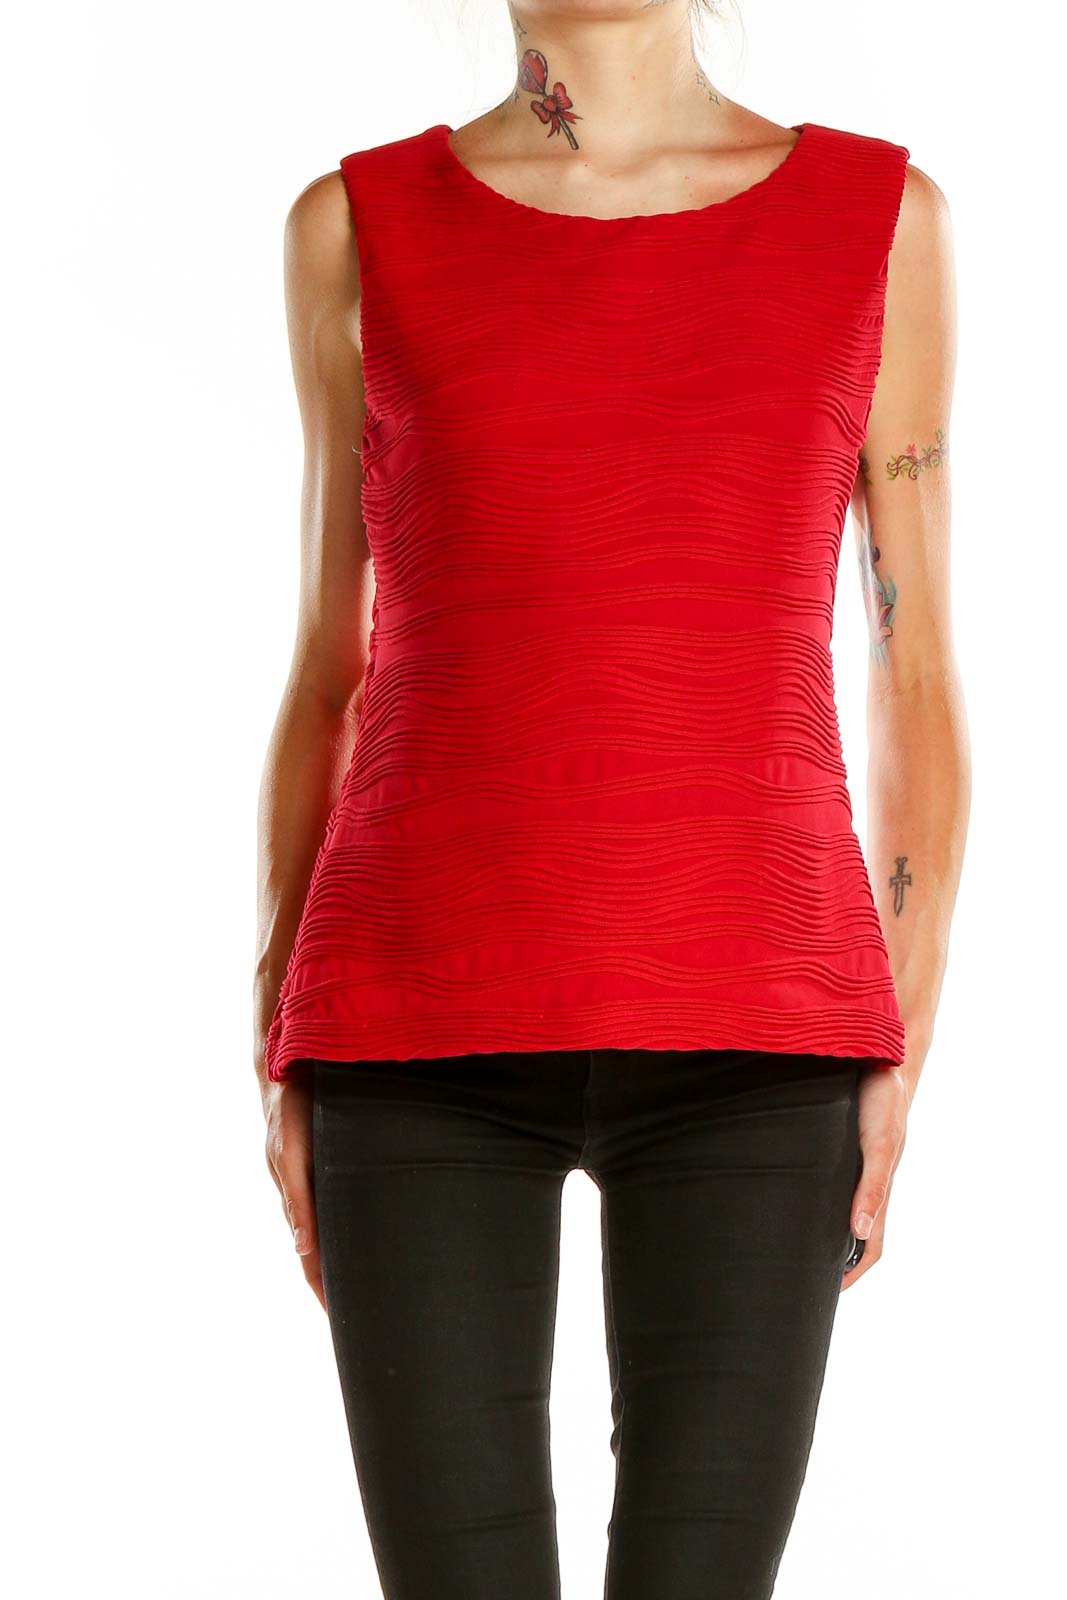 Red Textured Work Top Front